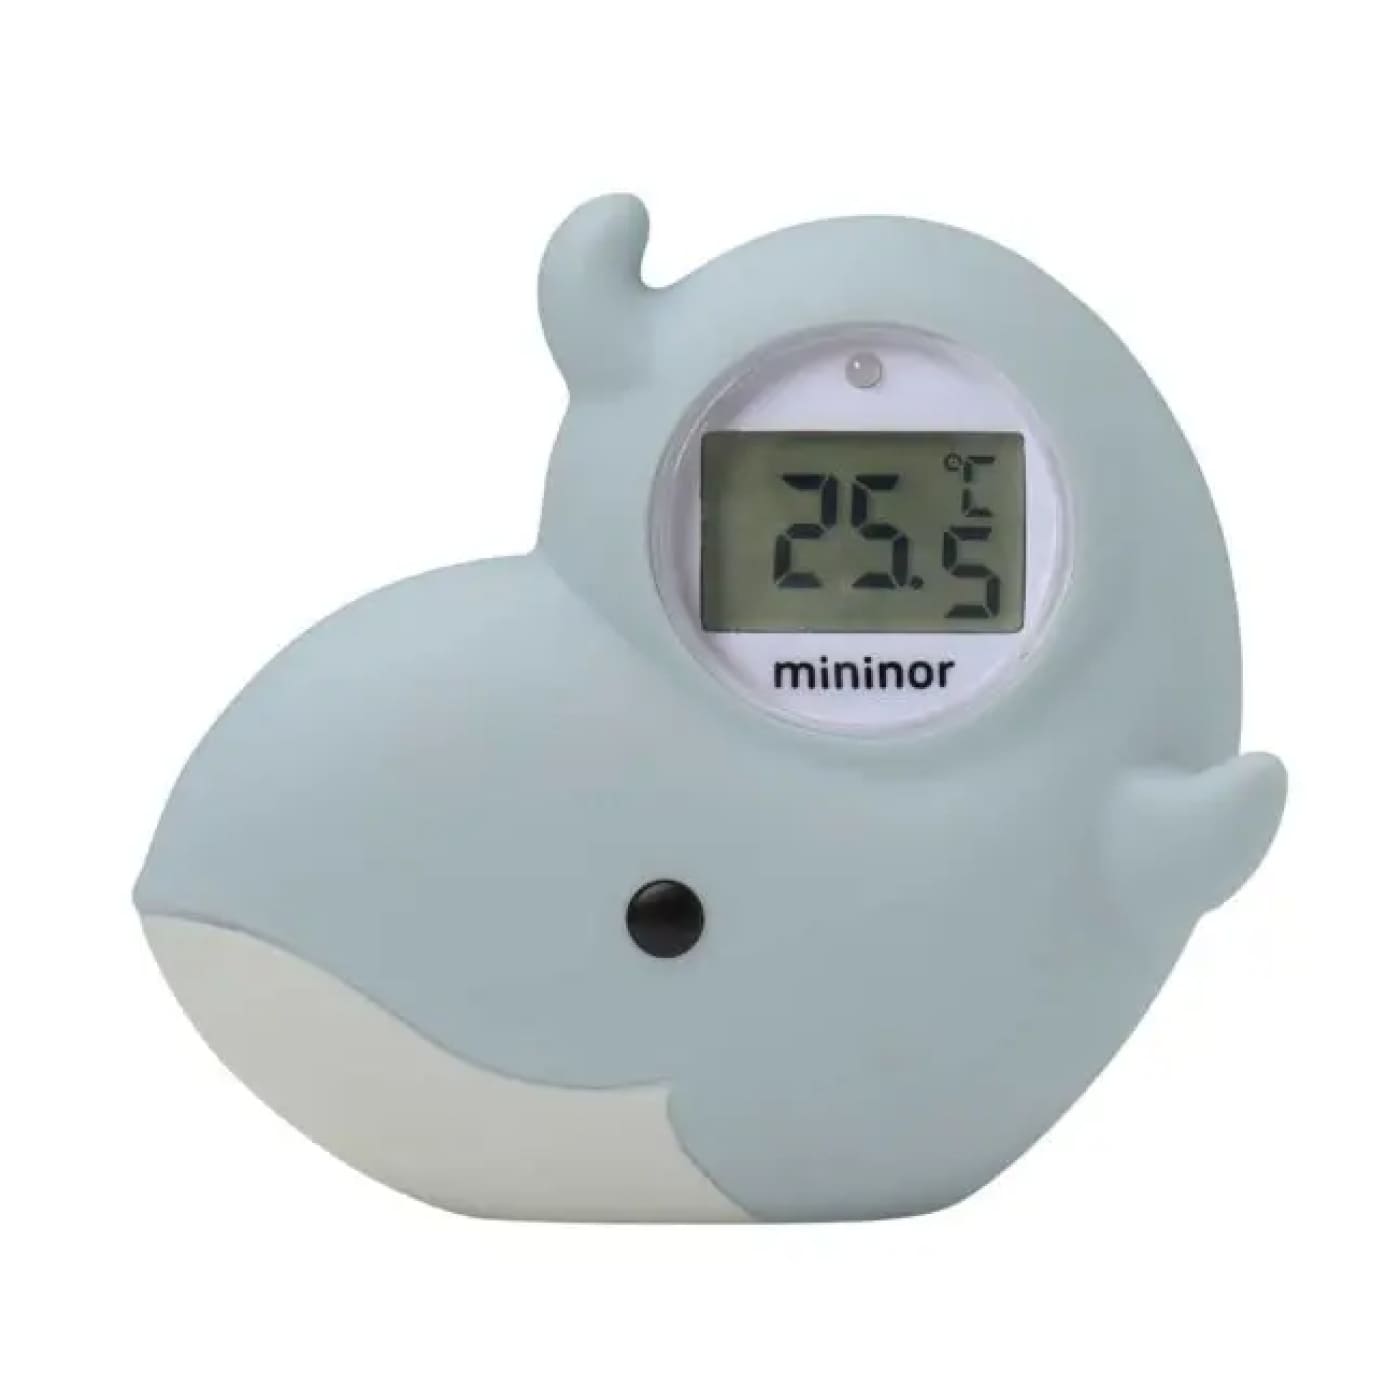 Mininor Bath Thermometer - Whale - Whale - HEALTH & HOME SAFETY - THERMOMETERS/MEDICINAL